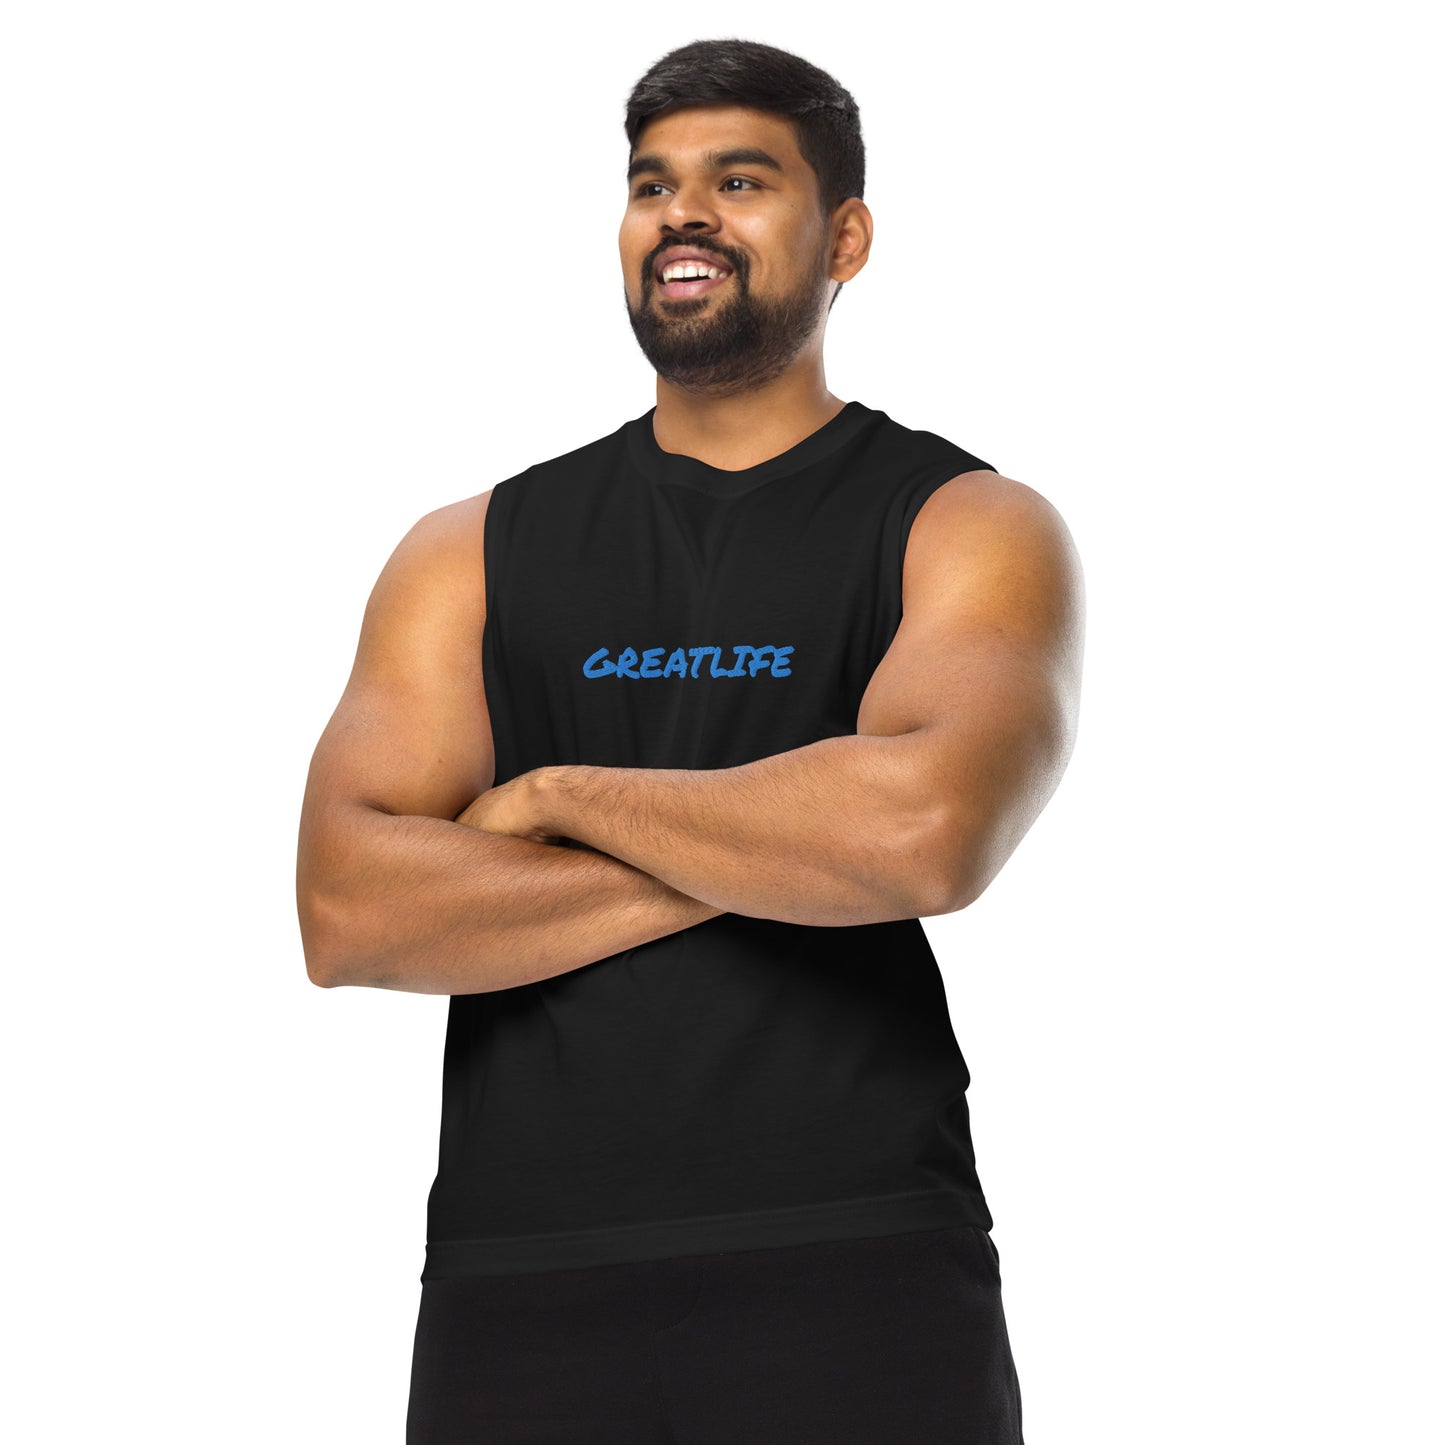 NEW BLACK and BLUE GREATLIFE Muscle Shirt